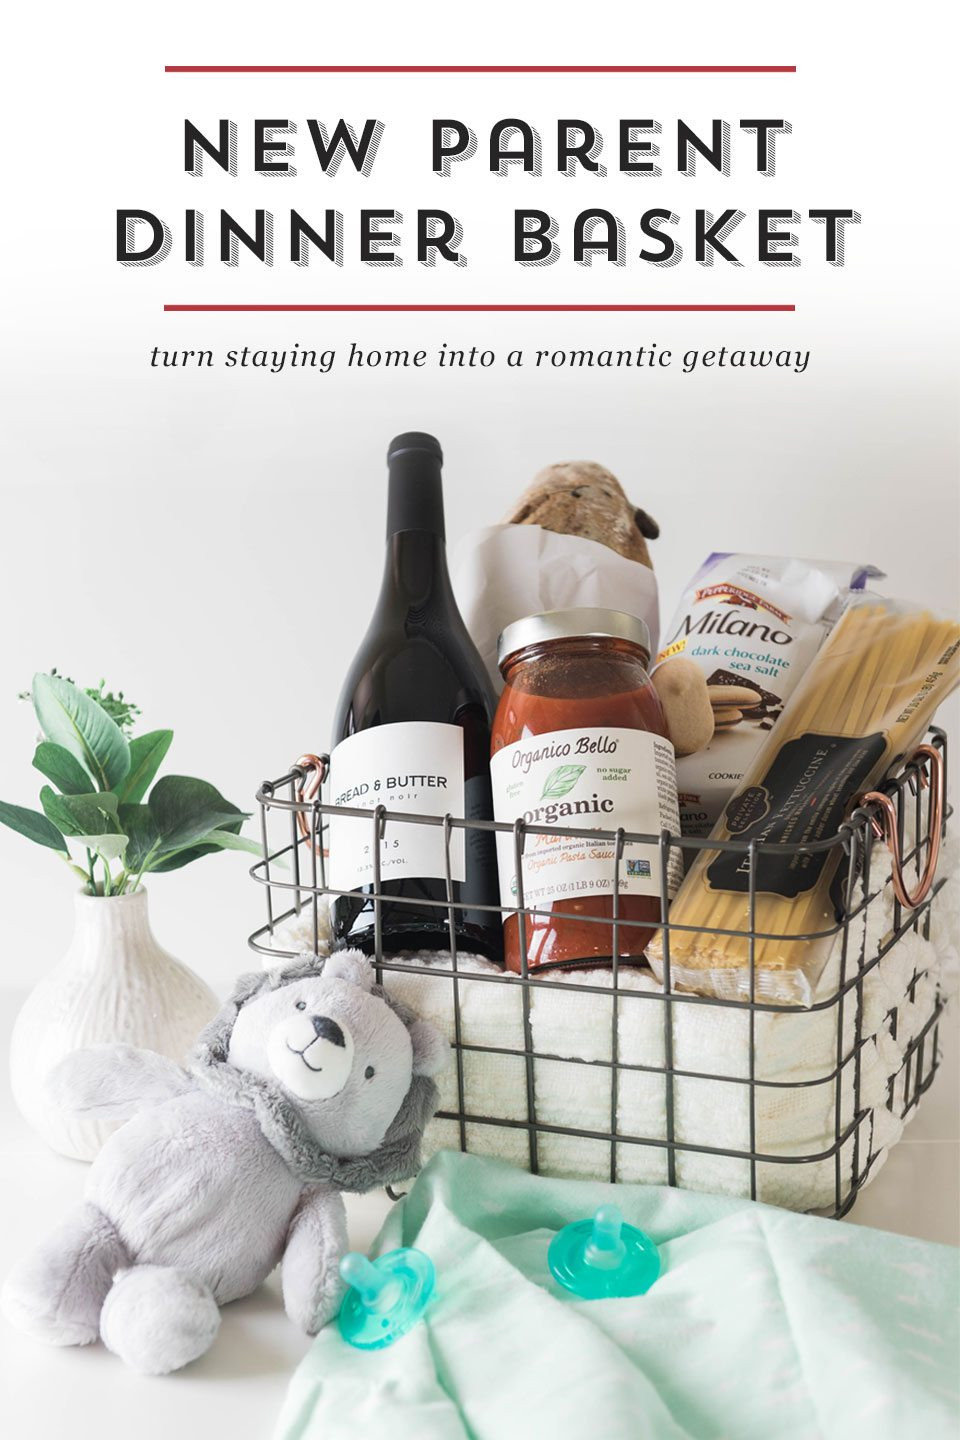 Gift Basket Ideas For New Parents
 DIY Date Night Gift Basket